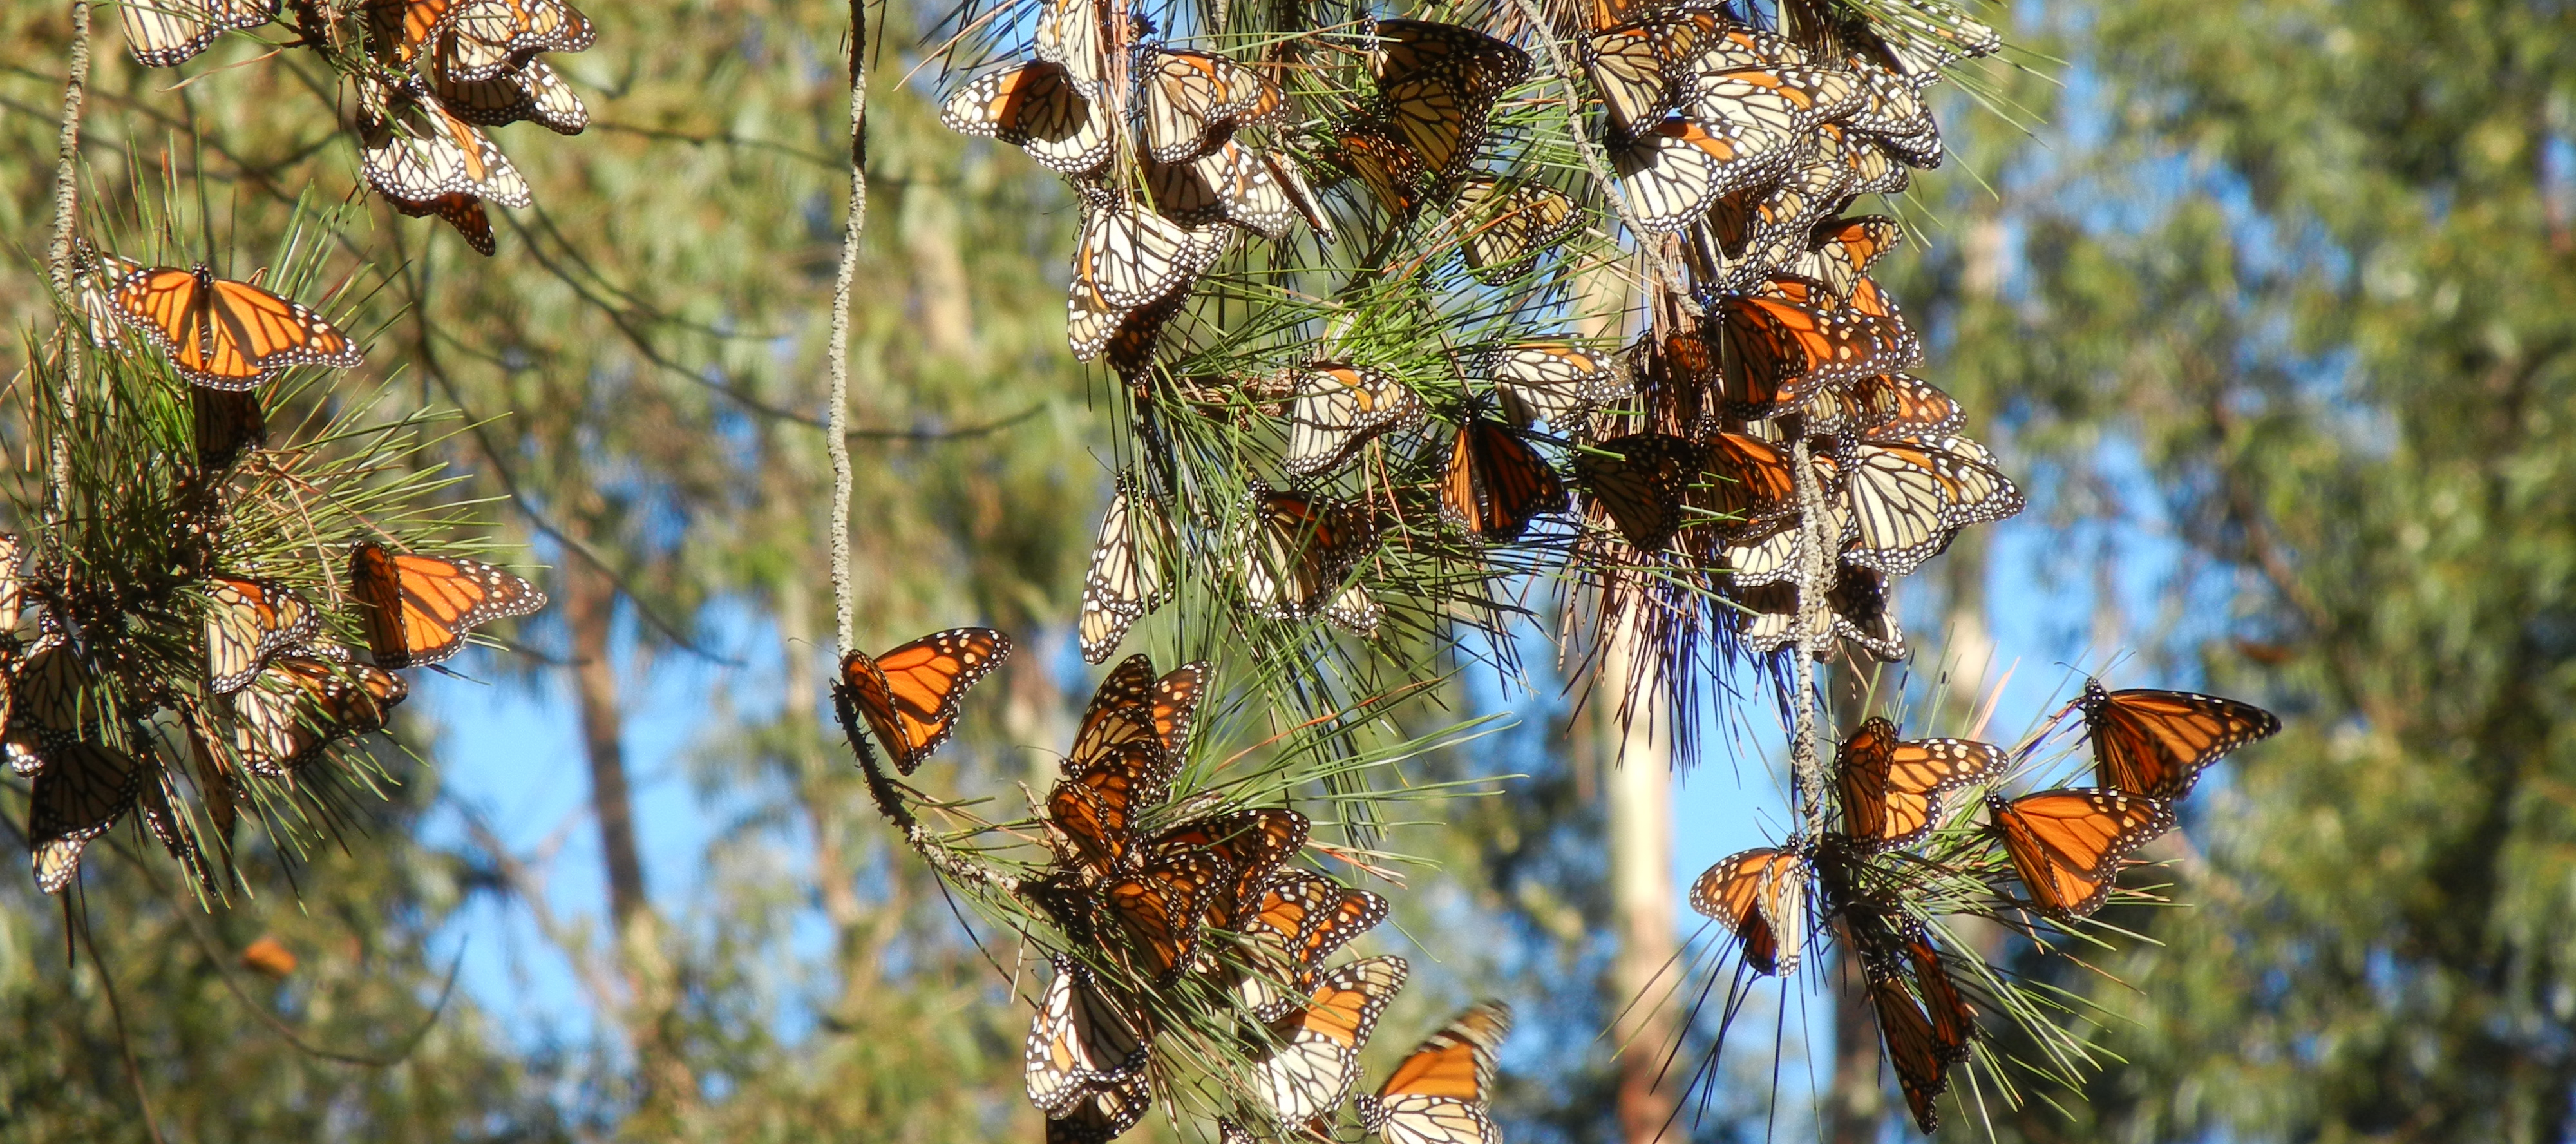 Monarchs cluster on a pine branch. Those with their wings closed look more drab, similar to dead leaves. Those with their wings open are bright orange.